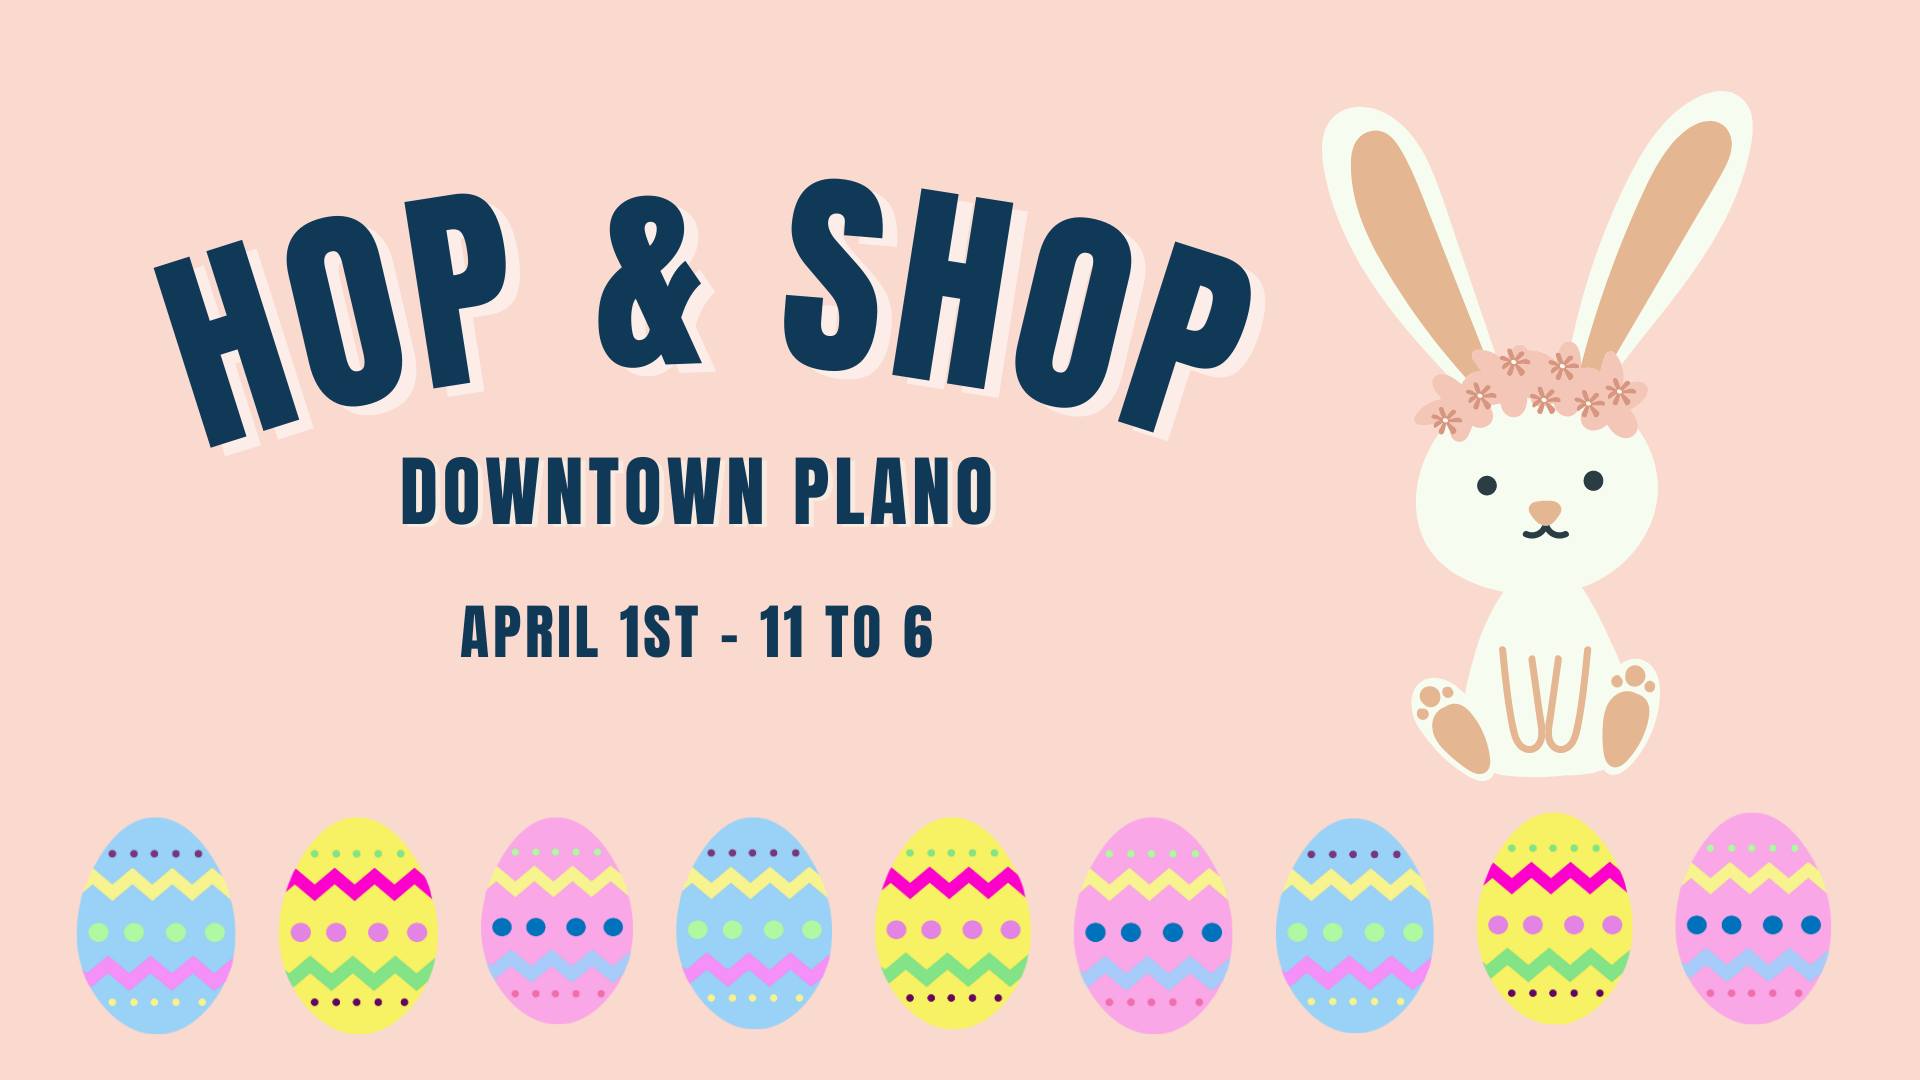 Hop & Shop in Downtown Plano FB Image